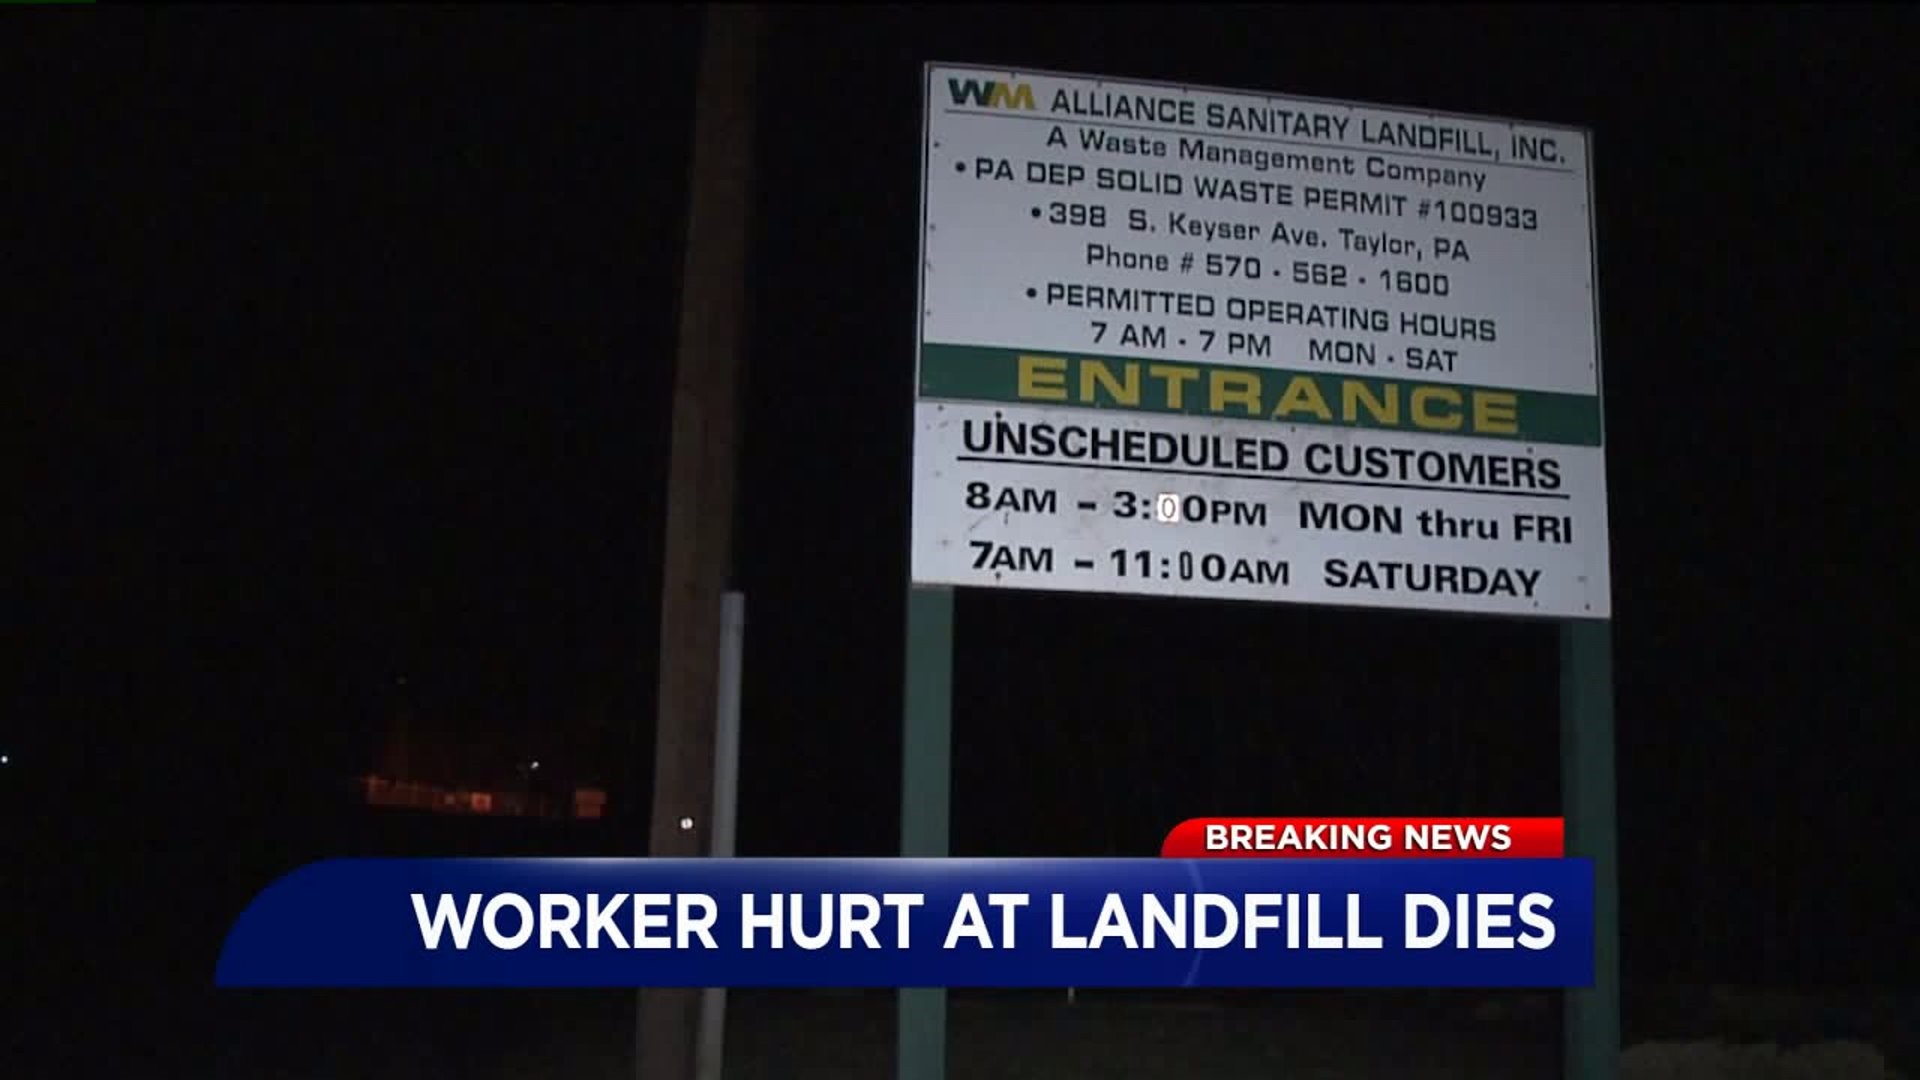 Coroner: Man Dead After Workplace Accident at Landfill